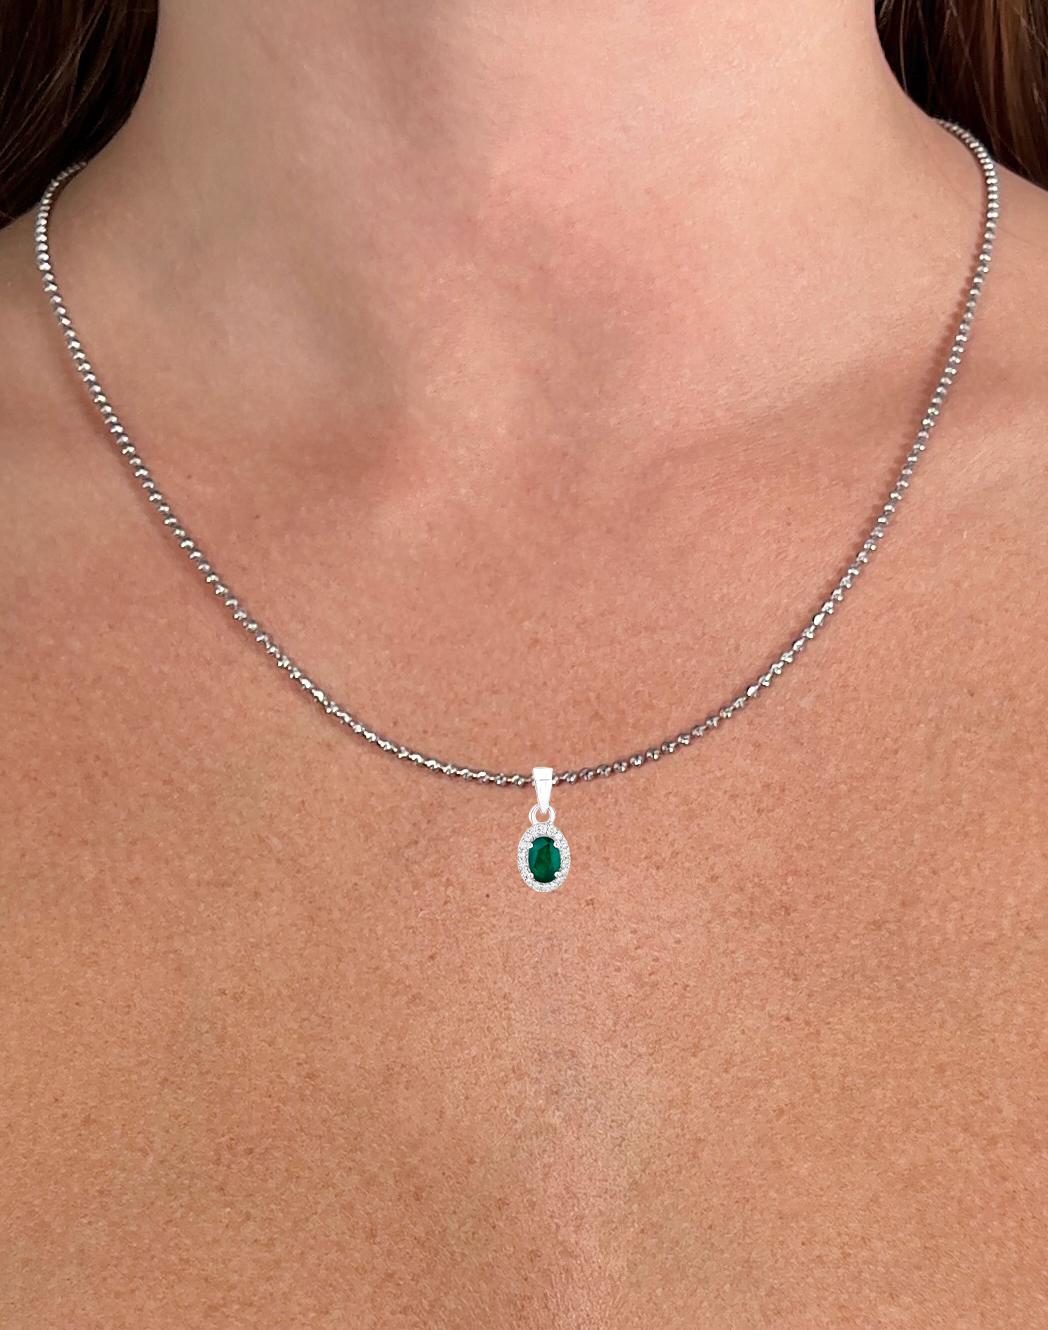 Contemporary Zambian Emerald Pendant Necklace With Diamonds 0.81 Carats 14K White Gold For Sale